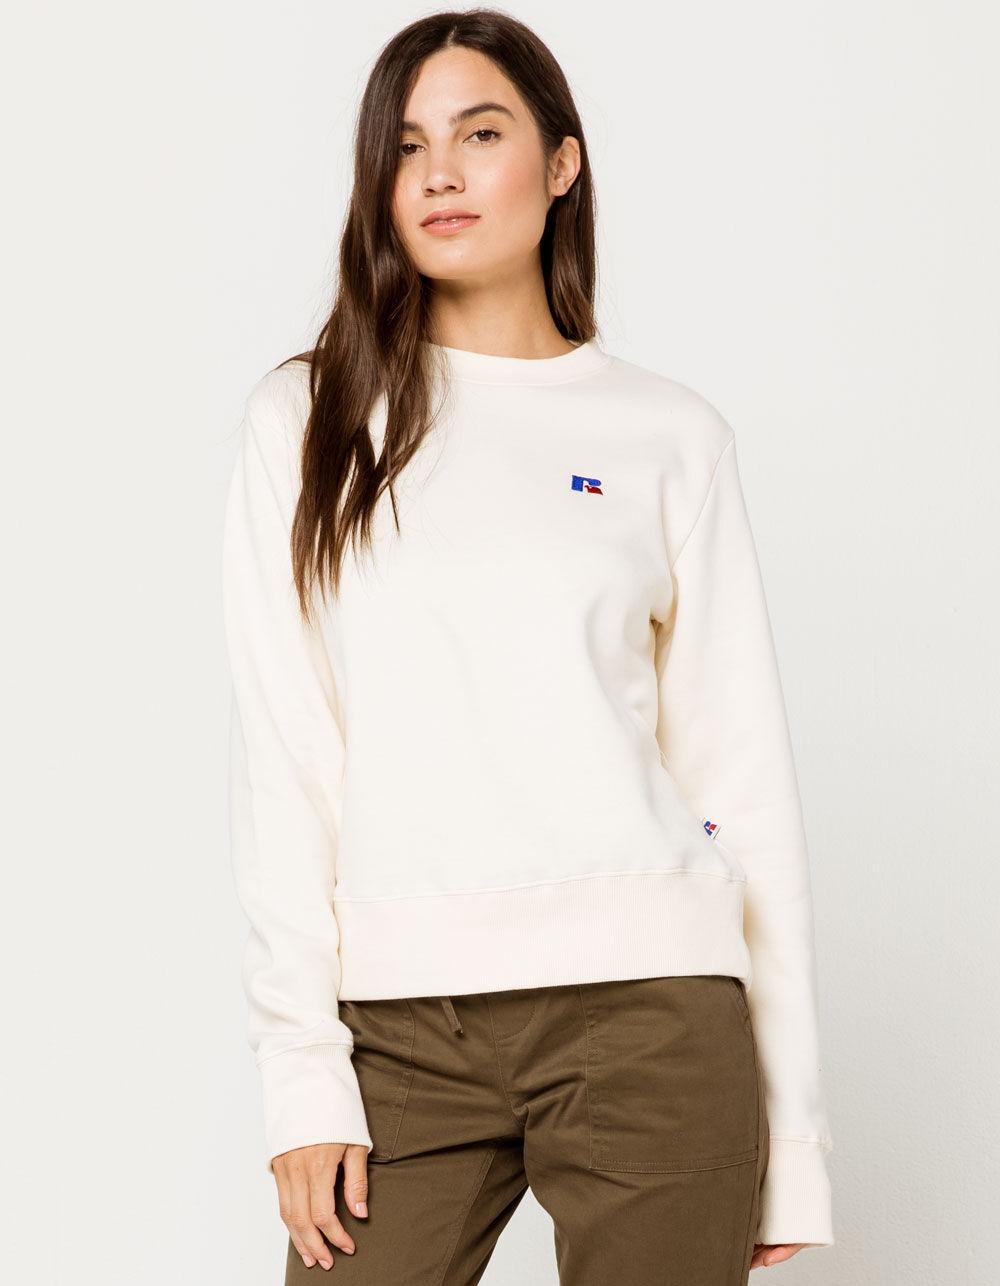 Russell Athletic Fleece Lily Crew Womens Sweatshirt in White - Lyst